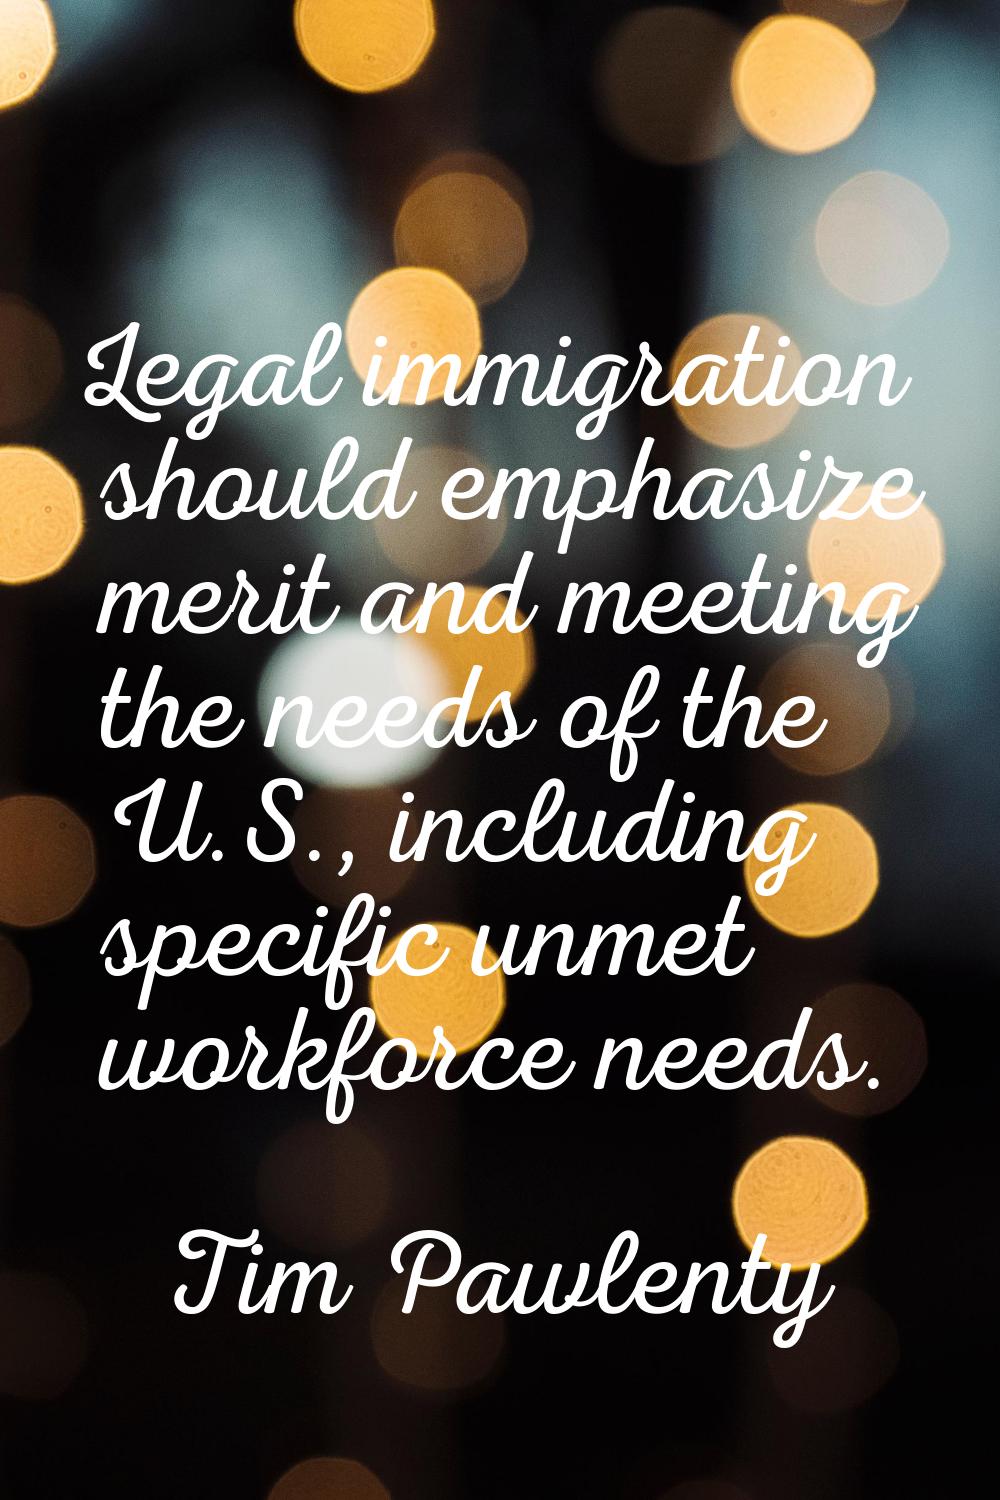 Legal immigration should emphasize merit and meeting the needs of the U.S., including specific unme